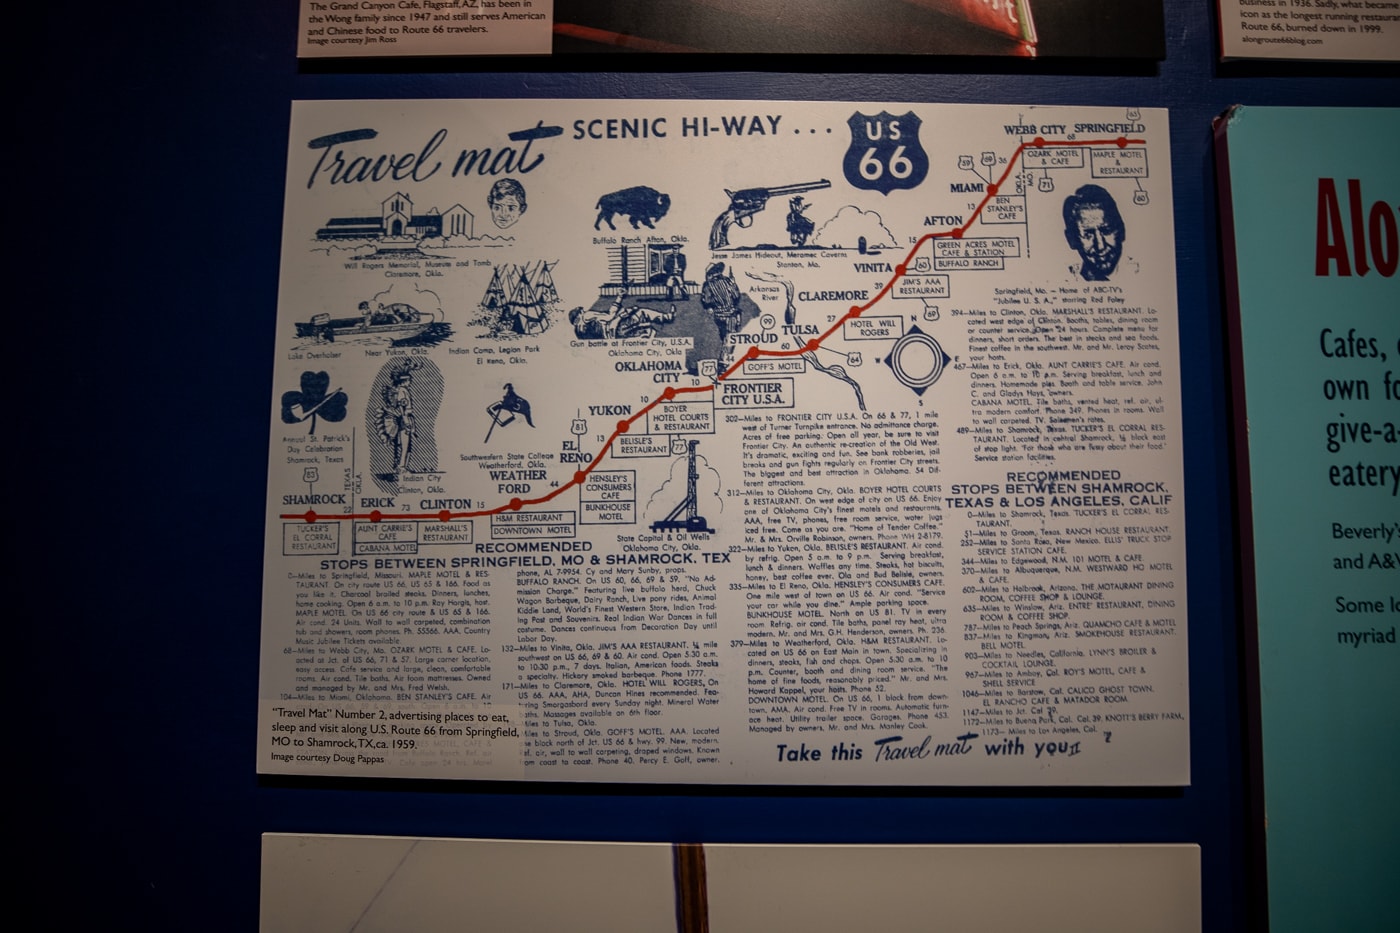 Travel Mat Route 66 map at the Oklahoma Route 66 Museum in Clinton, Oklahoma